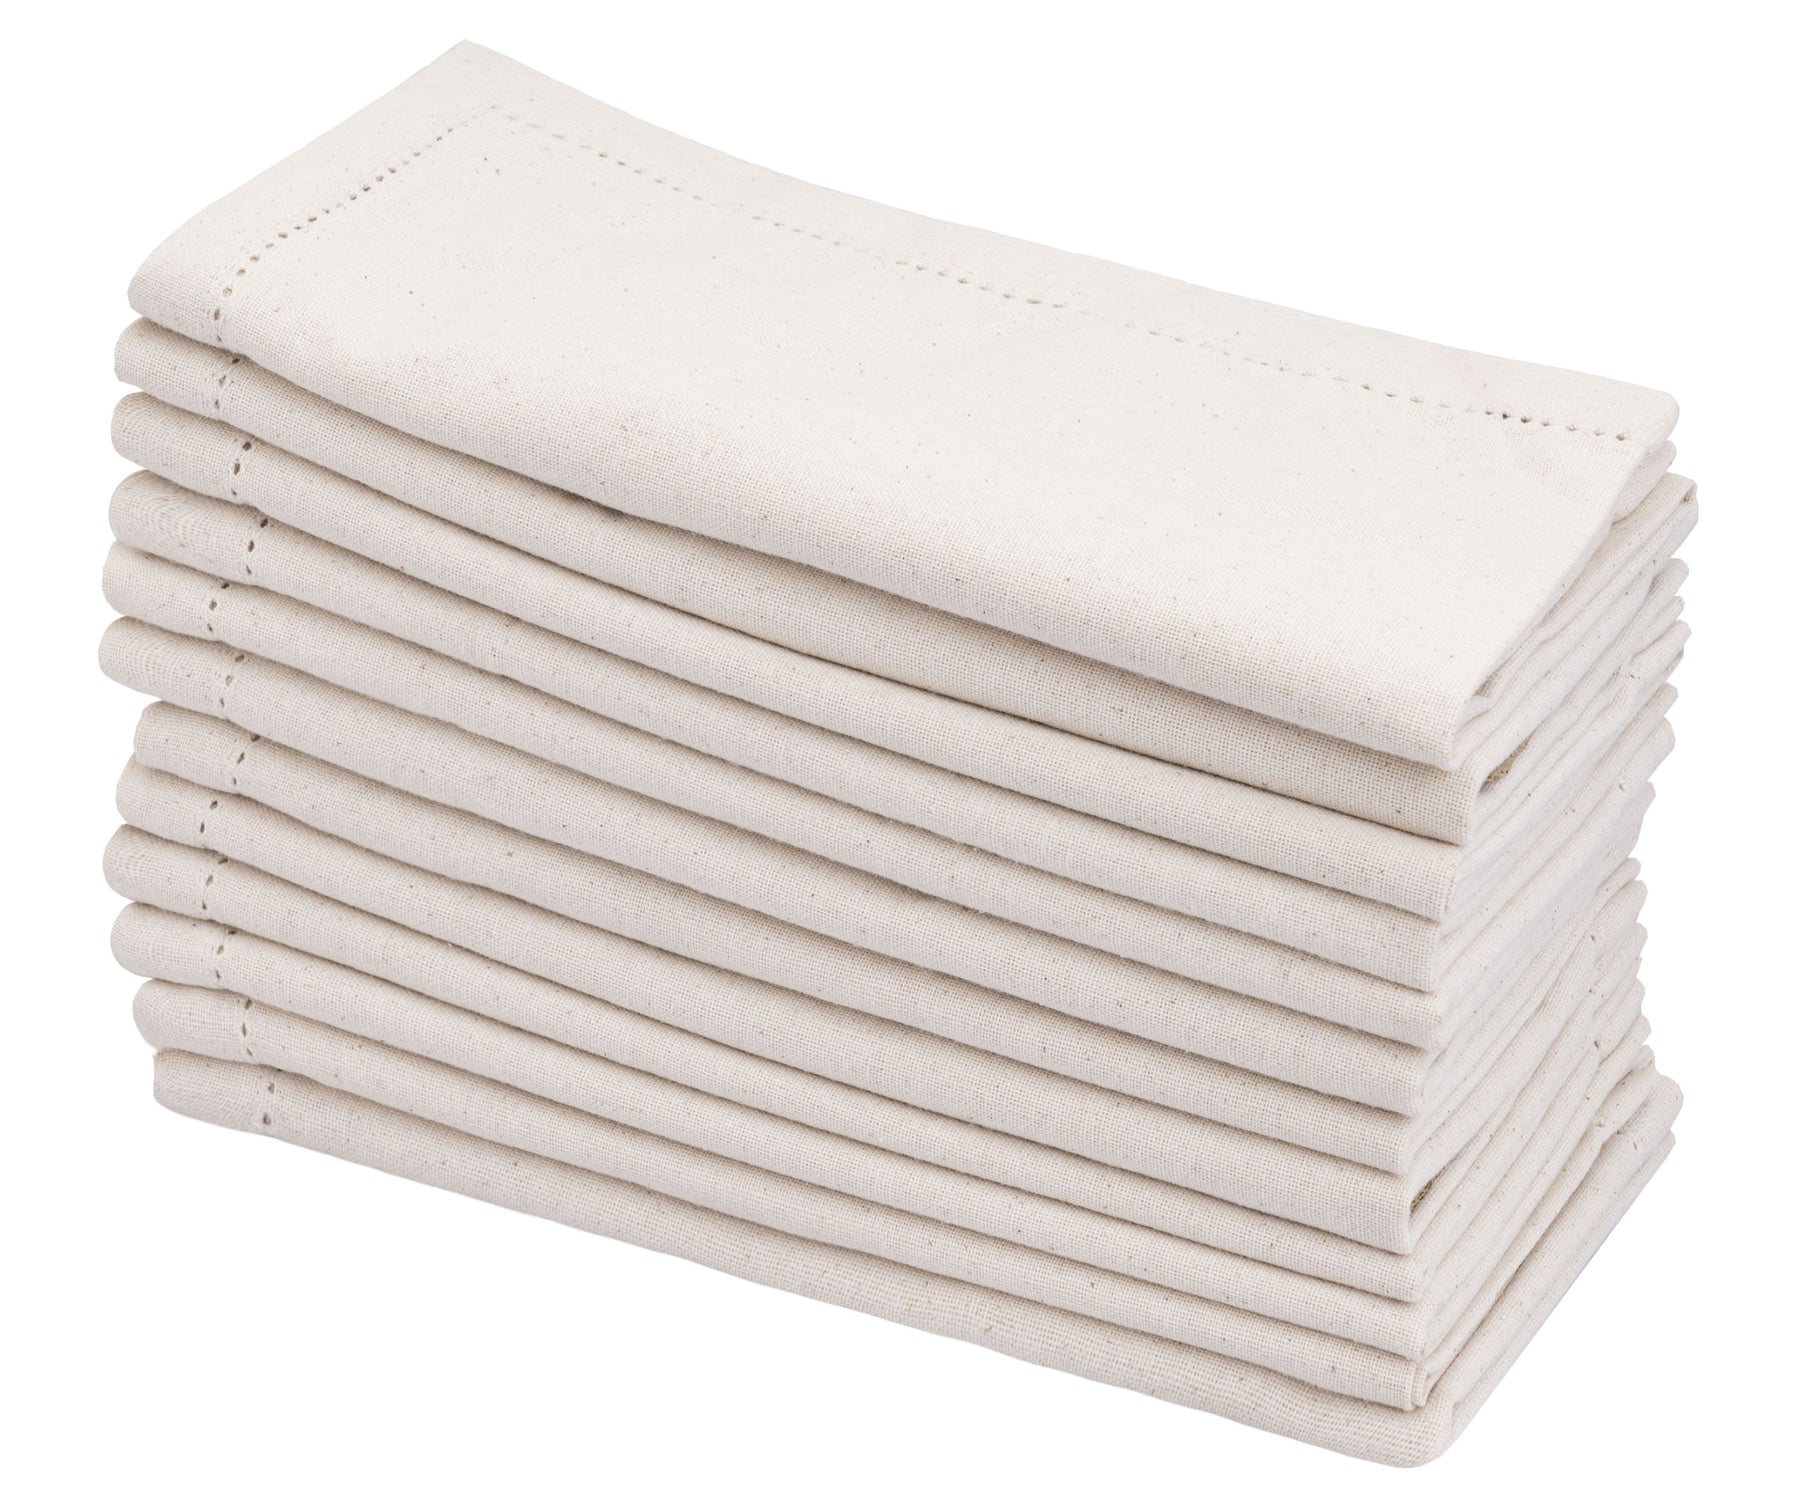 these cloth napkins set of 12 add a touch of rustic sophistication to any occasion, elevating the overall ambiance and dining experience.